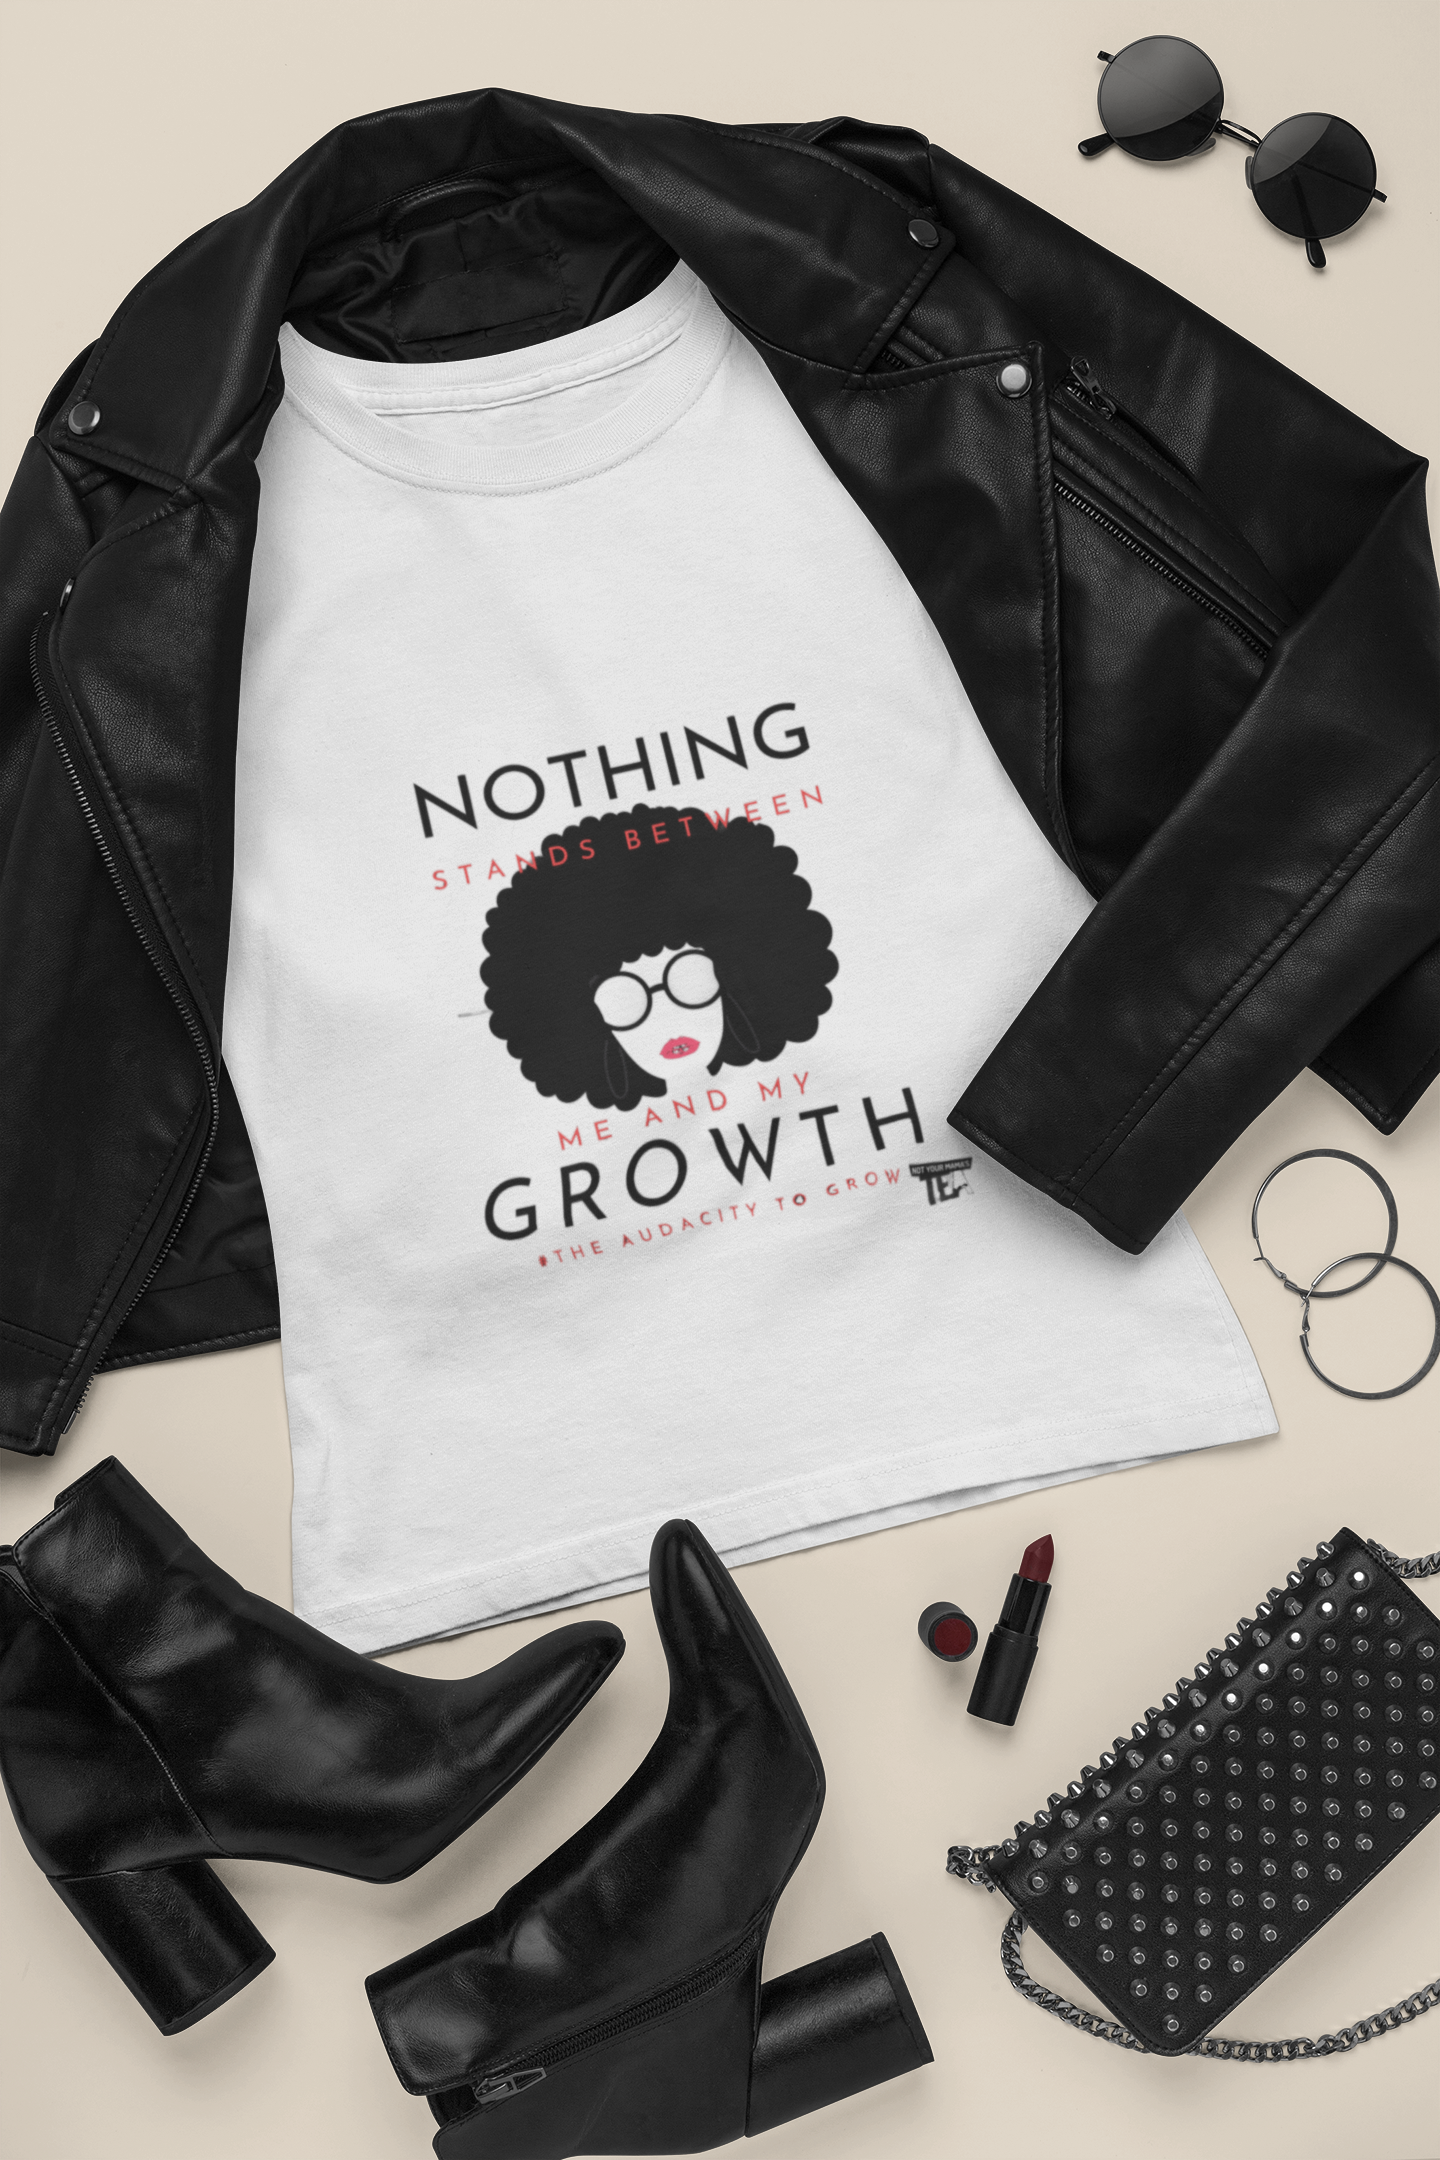 outfit-mockup-featuring-a-t-shirt-surrounded-by-dark-leather-girly-garments-26395